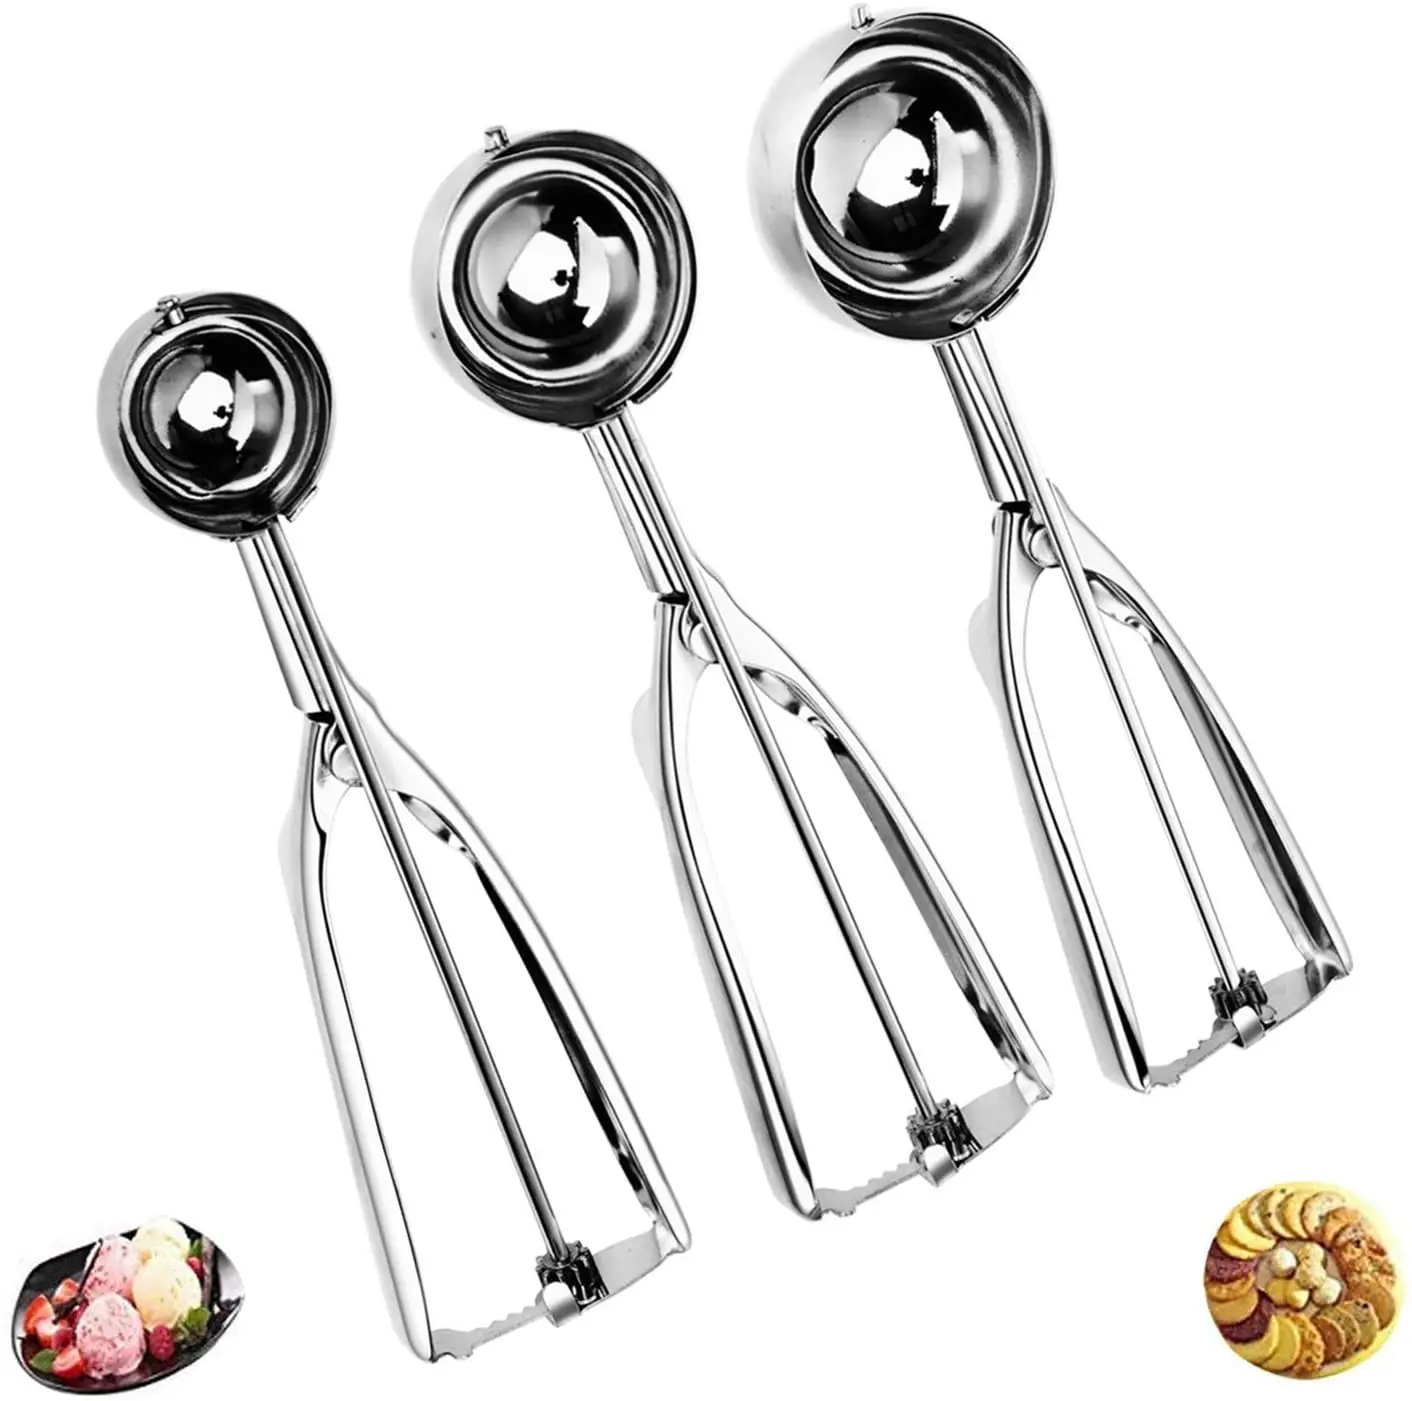 

Dishwasher Safe Cookie Scoop Stainless Steel Ice Cream Scoops Set with Trigger Realse, Silver